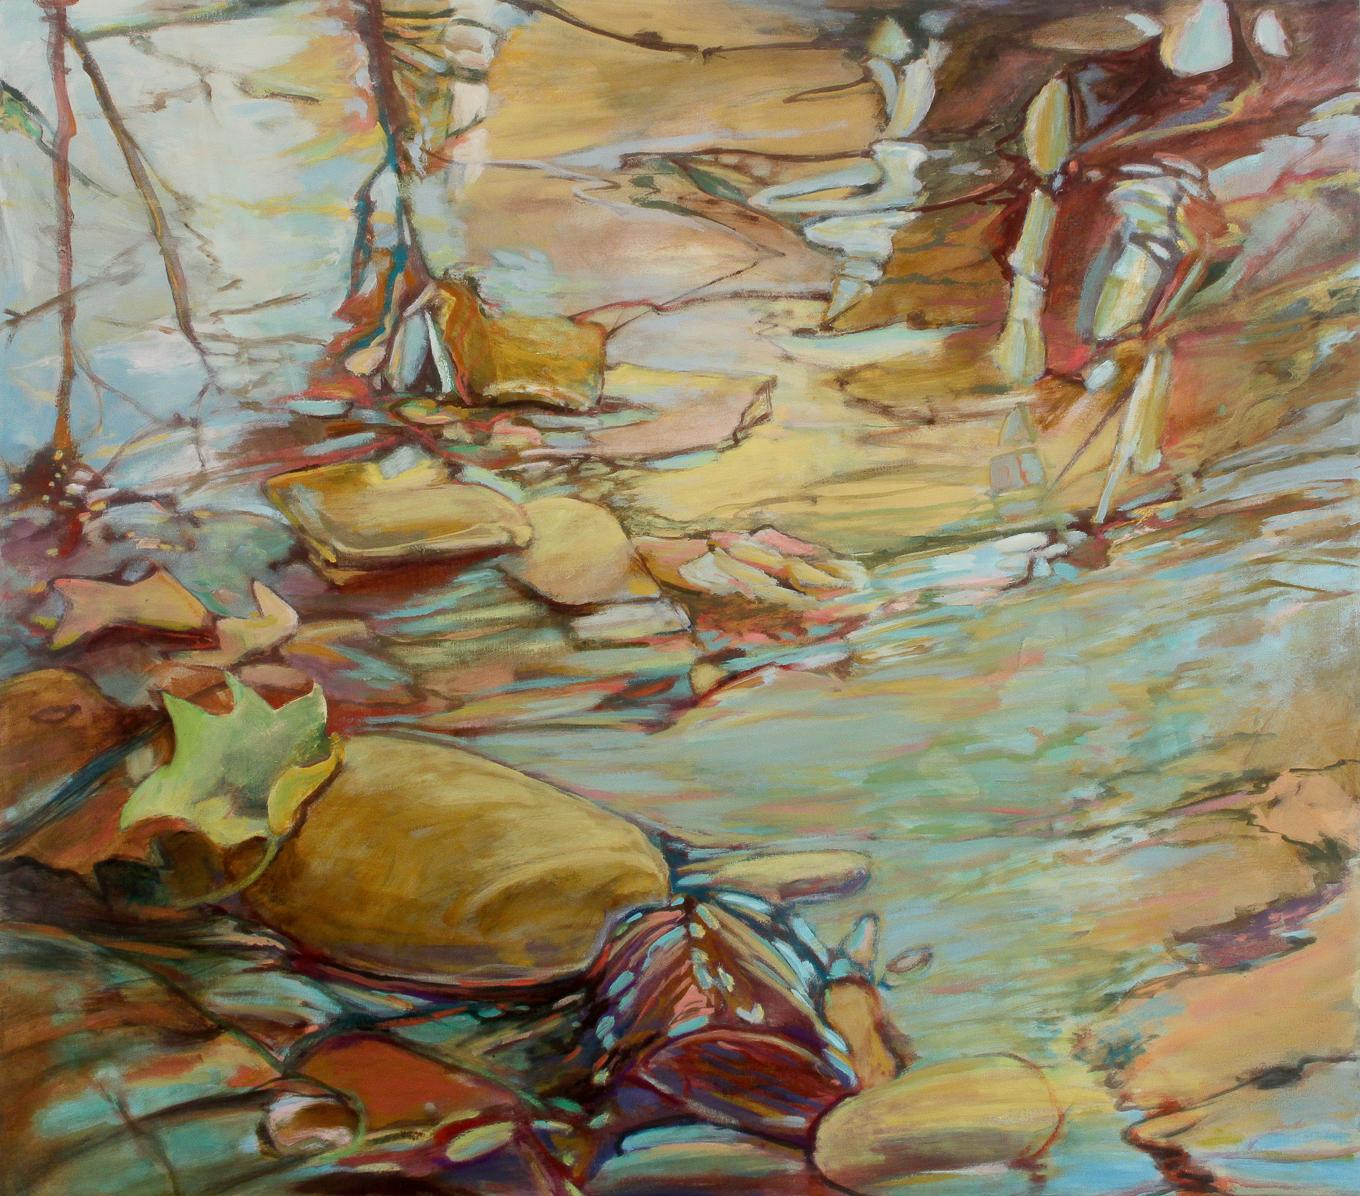 Celadon Sea, Abstract Art, Contemporary Art, Reflection Series of Water &Glass - Gray Landscape Painting by Ellen Hart